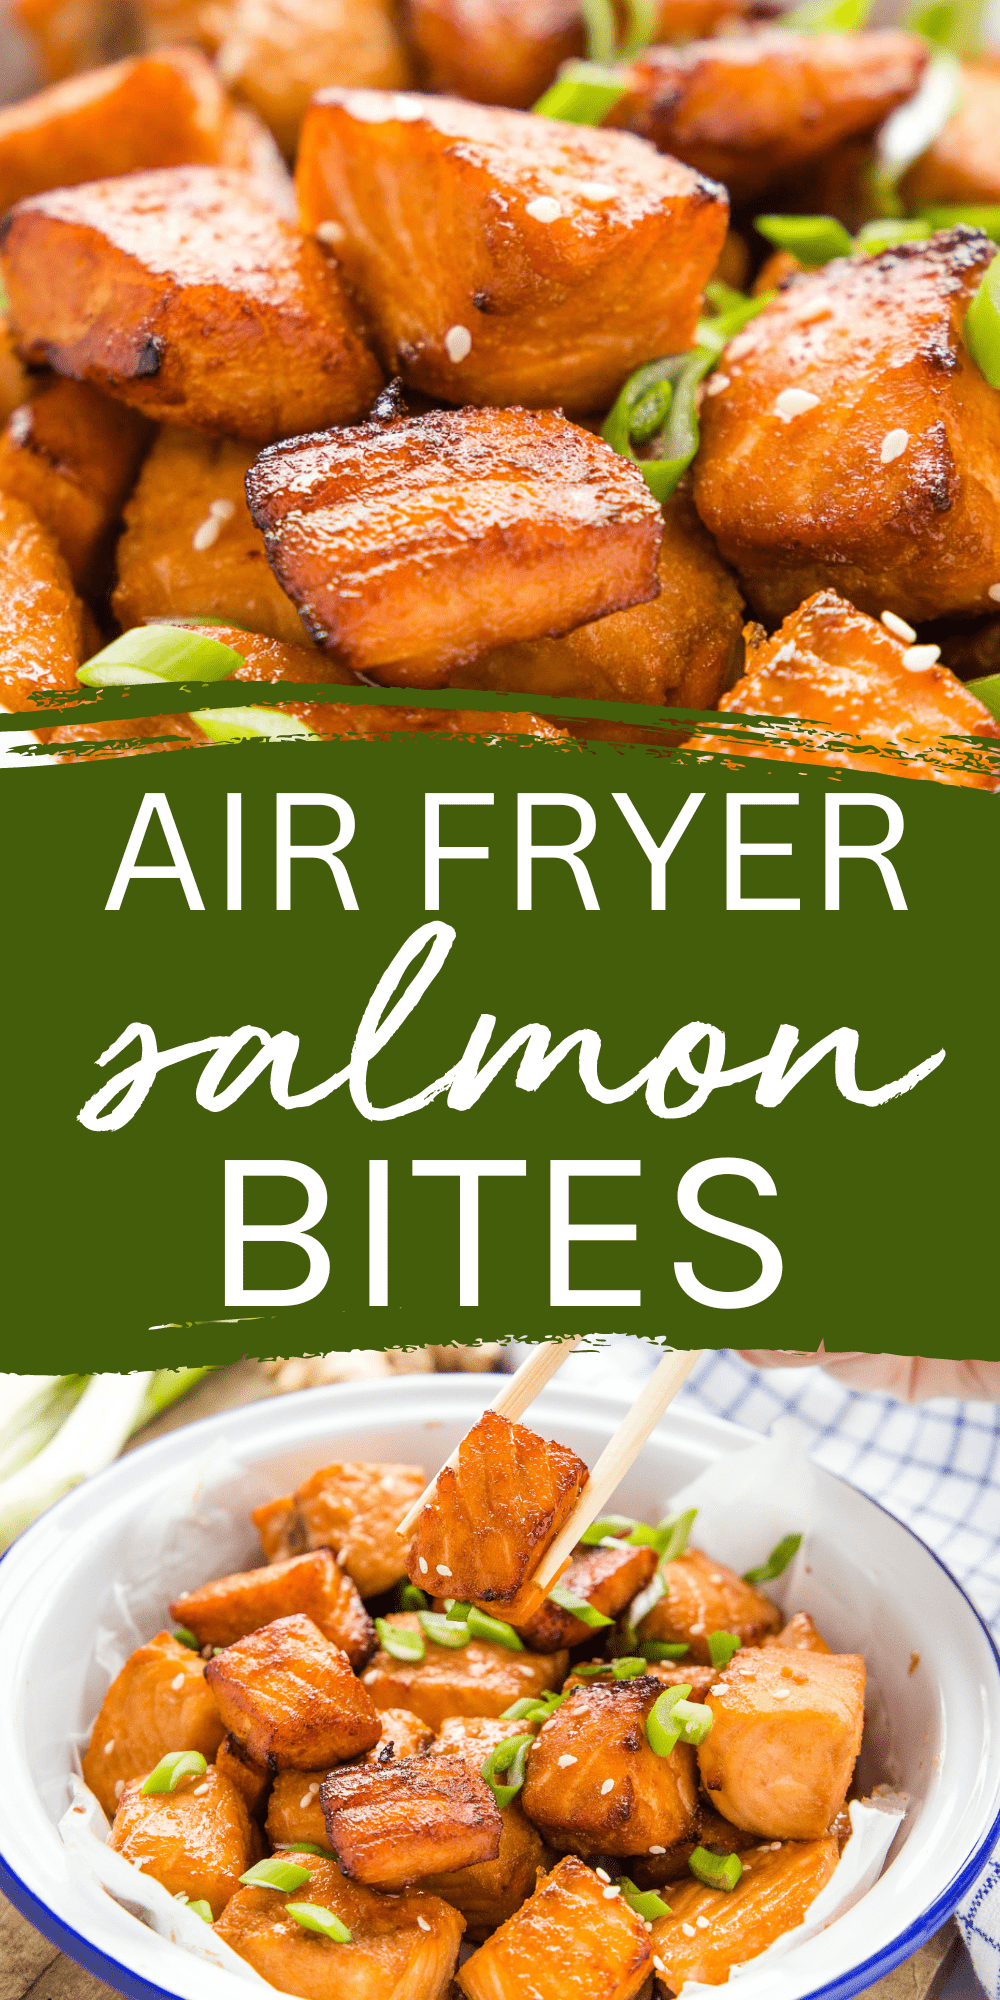 These Air Fryer Salmon Bites are perfectly crispy on the outside and tender on the inside. Chunks of salmon marinated in a sweet and savoury Asian-style sauce - ready in under 15 minutes! Recipe from thebusybaker.ca! #salmonbites #airfryersalmonbites #airfryersalmon #healthyrecipe #seafood #health #airfryerrecipe #airfryer #pokebowl #stirfry via @busybakerblog